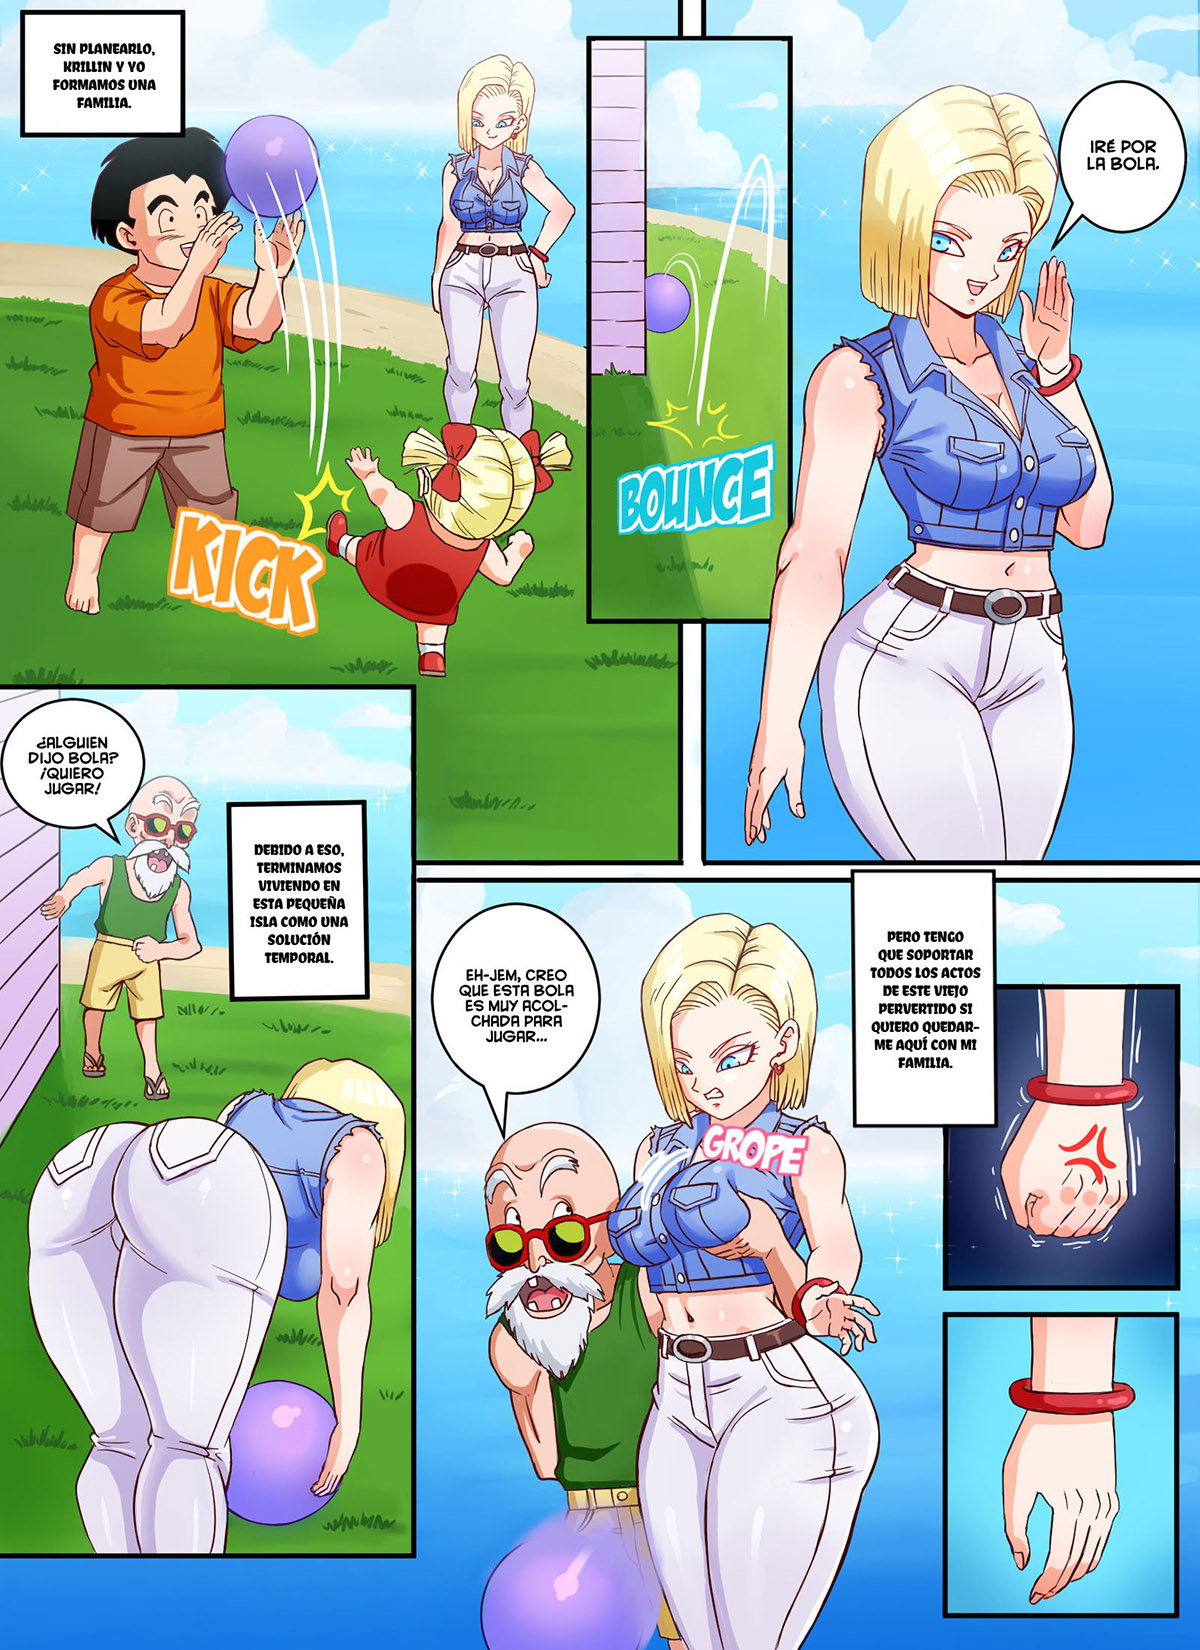 ANDROID 18 x ROSHI